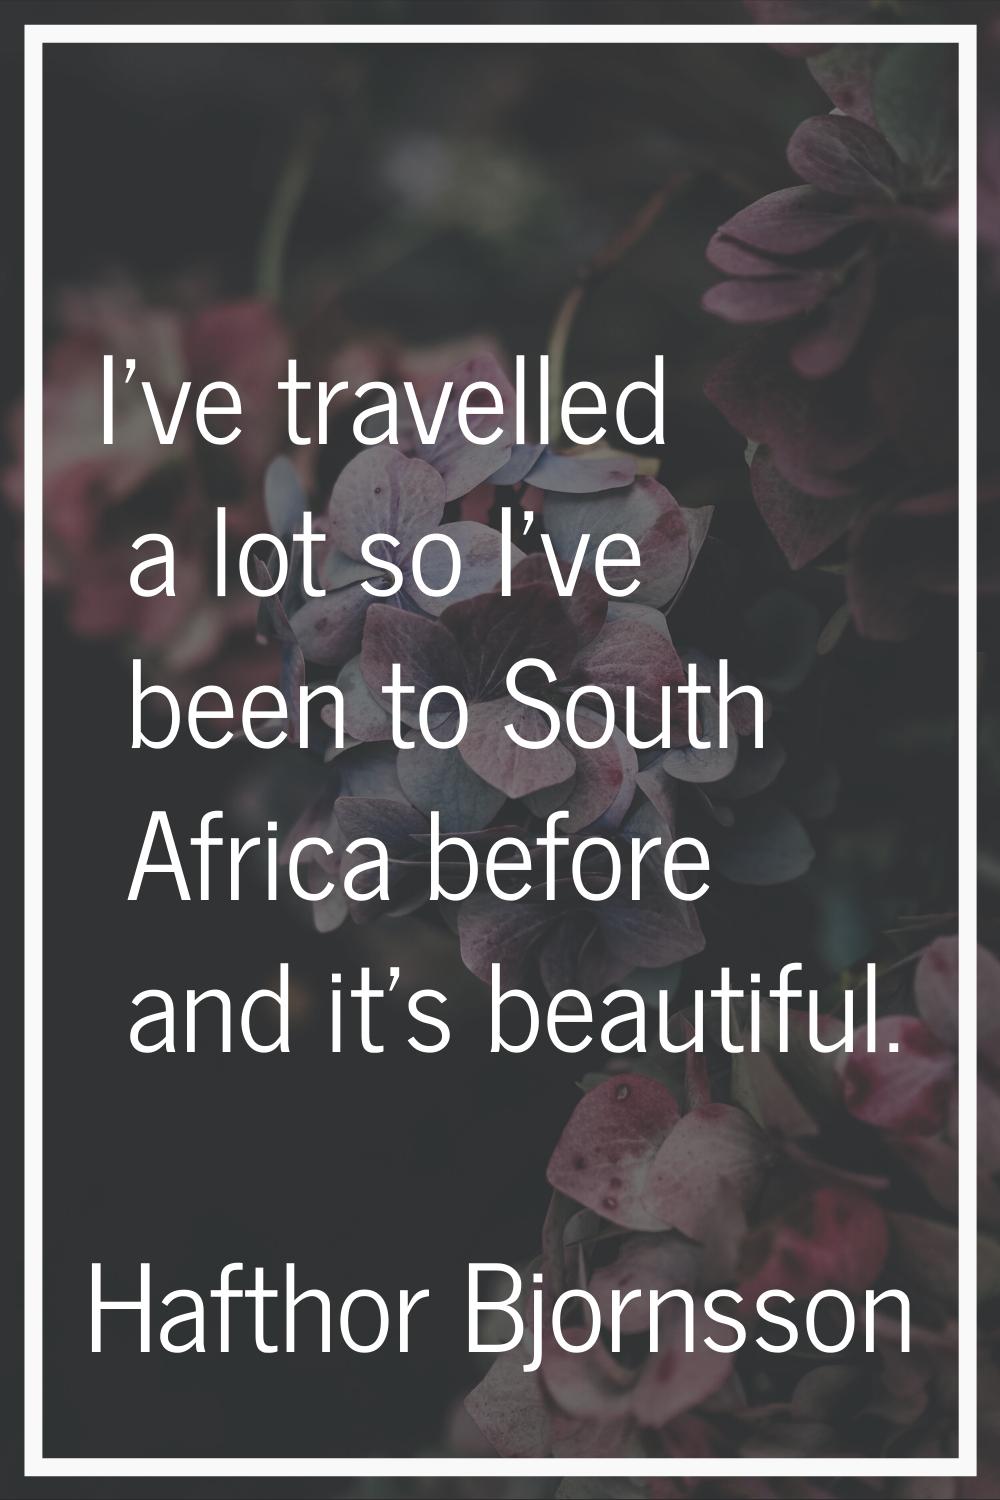 I've travelled a lot so I've been to South Africa before and it's beautiful.